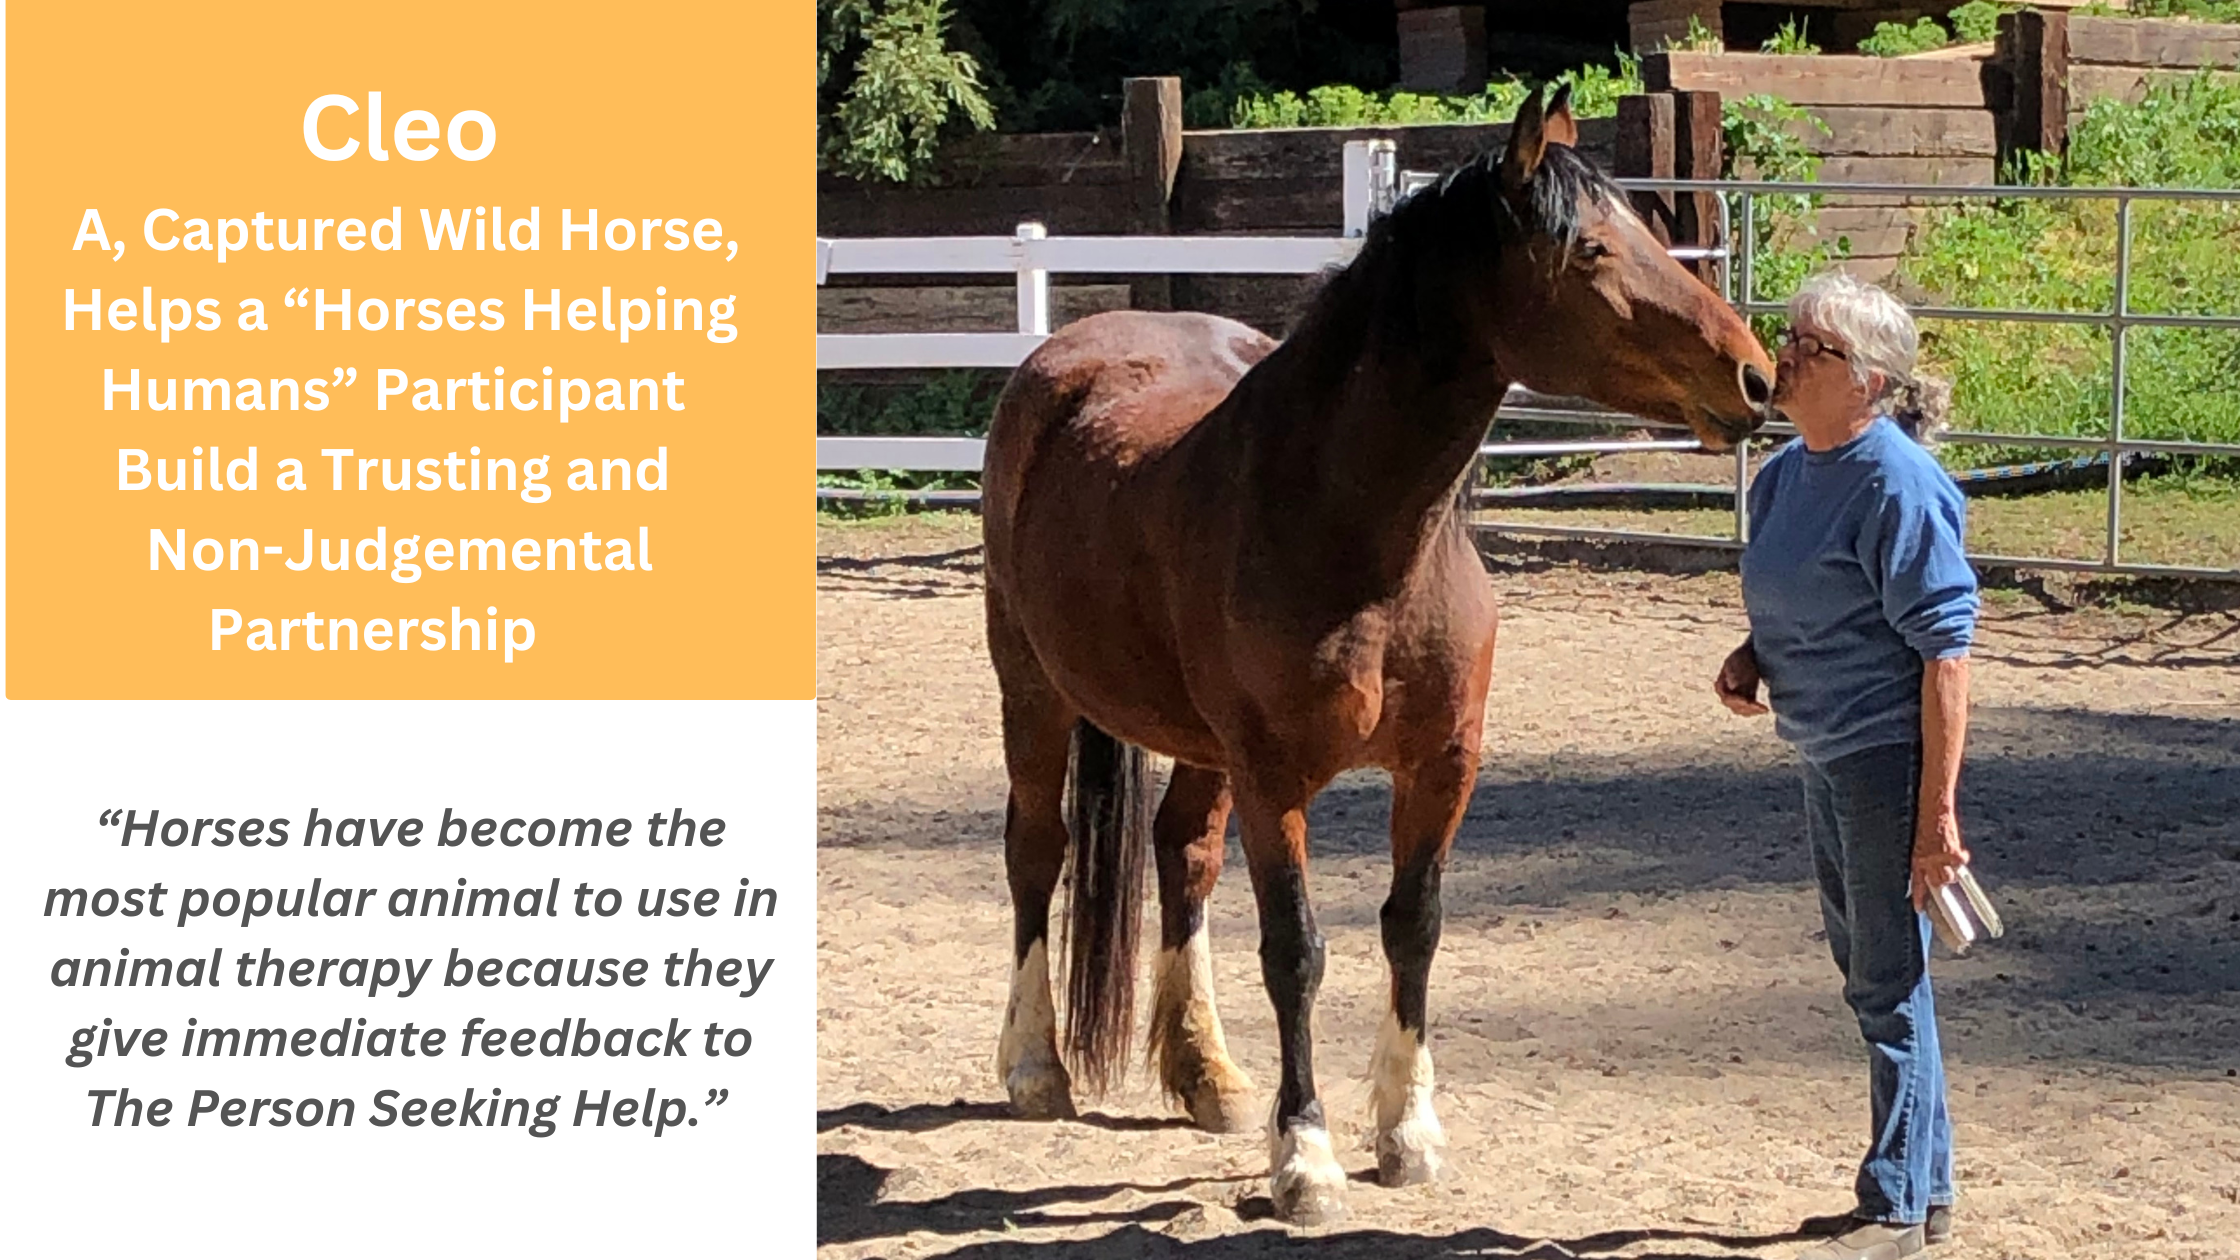 Cleo A, Captured Wild Horse, Helps a “Horses Helping Humans” Participant Build a Trusting and Non-Judgemental Partnership 